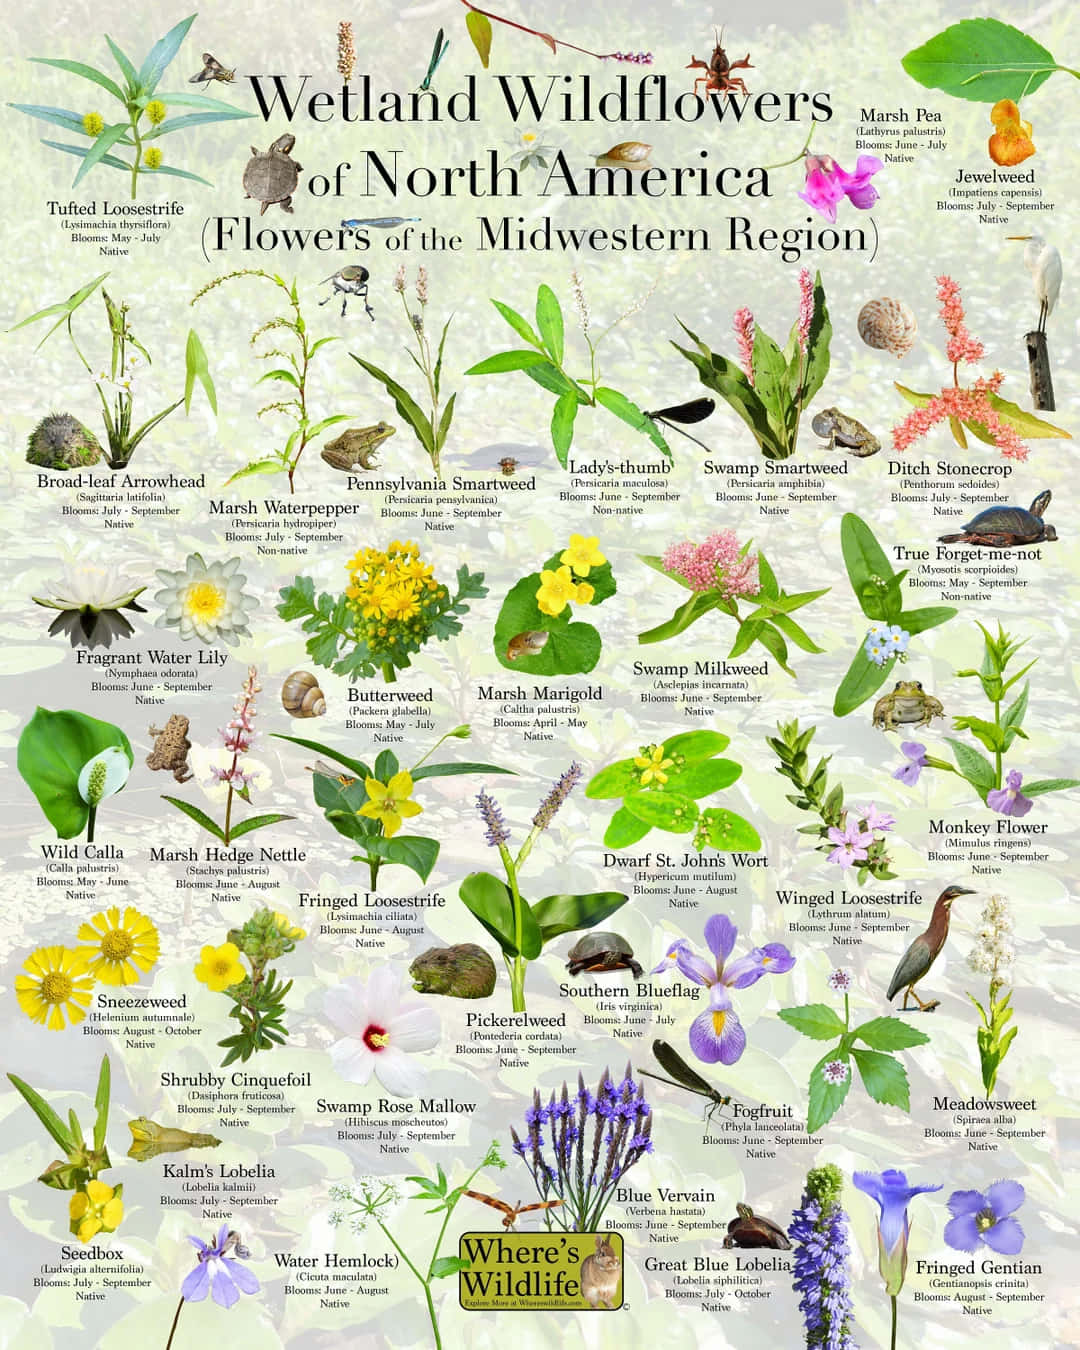 Identifying flowers for beginners - a guide